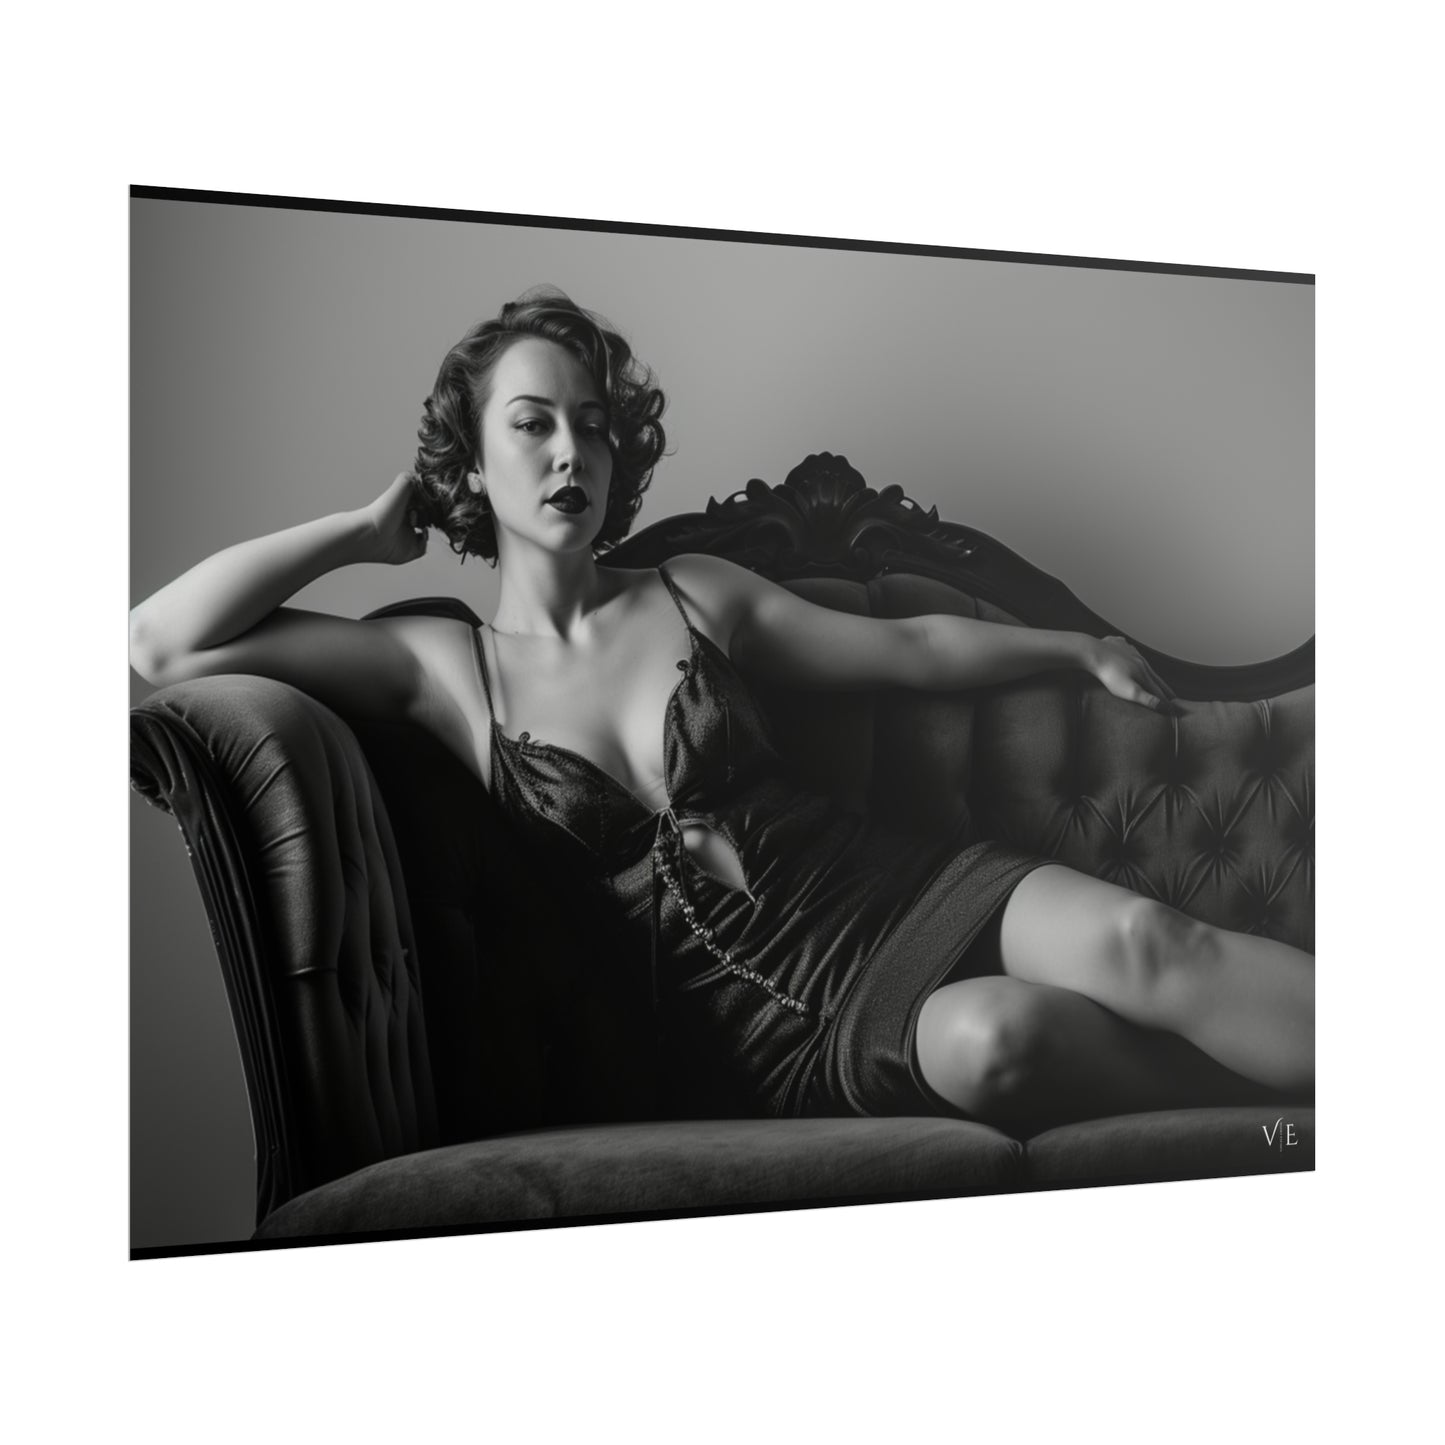 Black and White Vintage Erotic Woman on a Couch